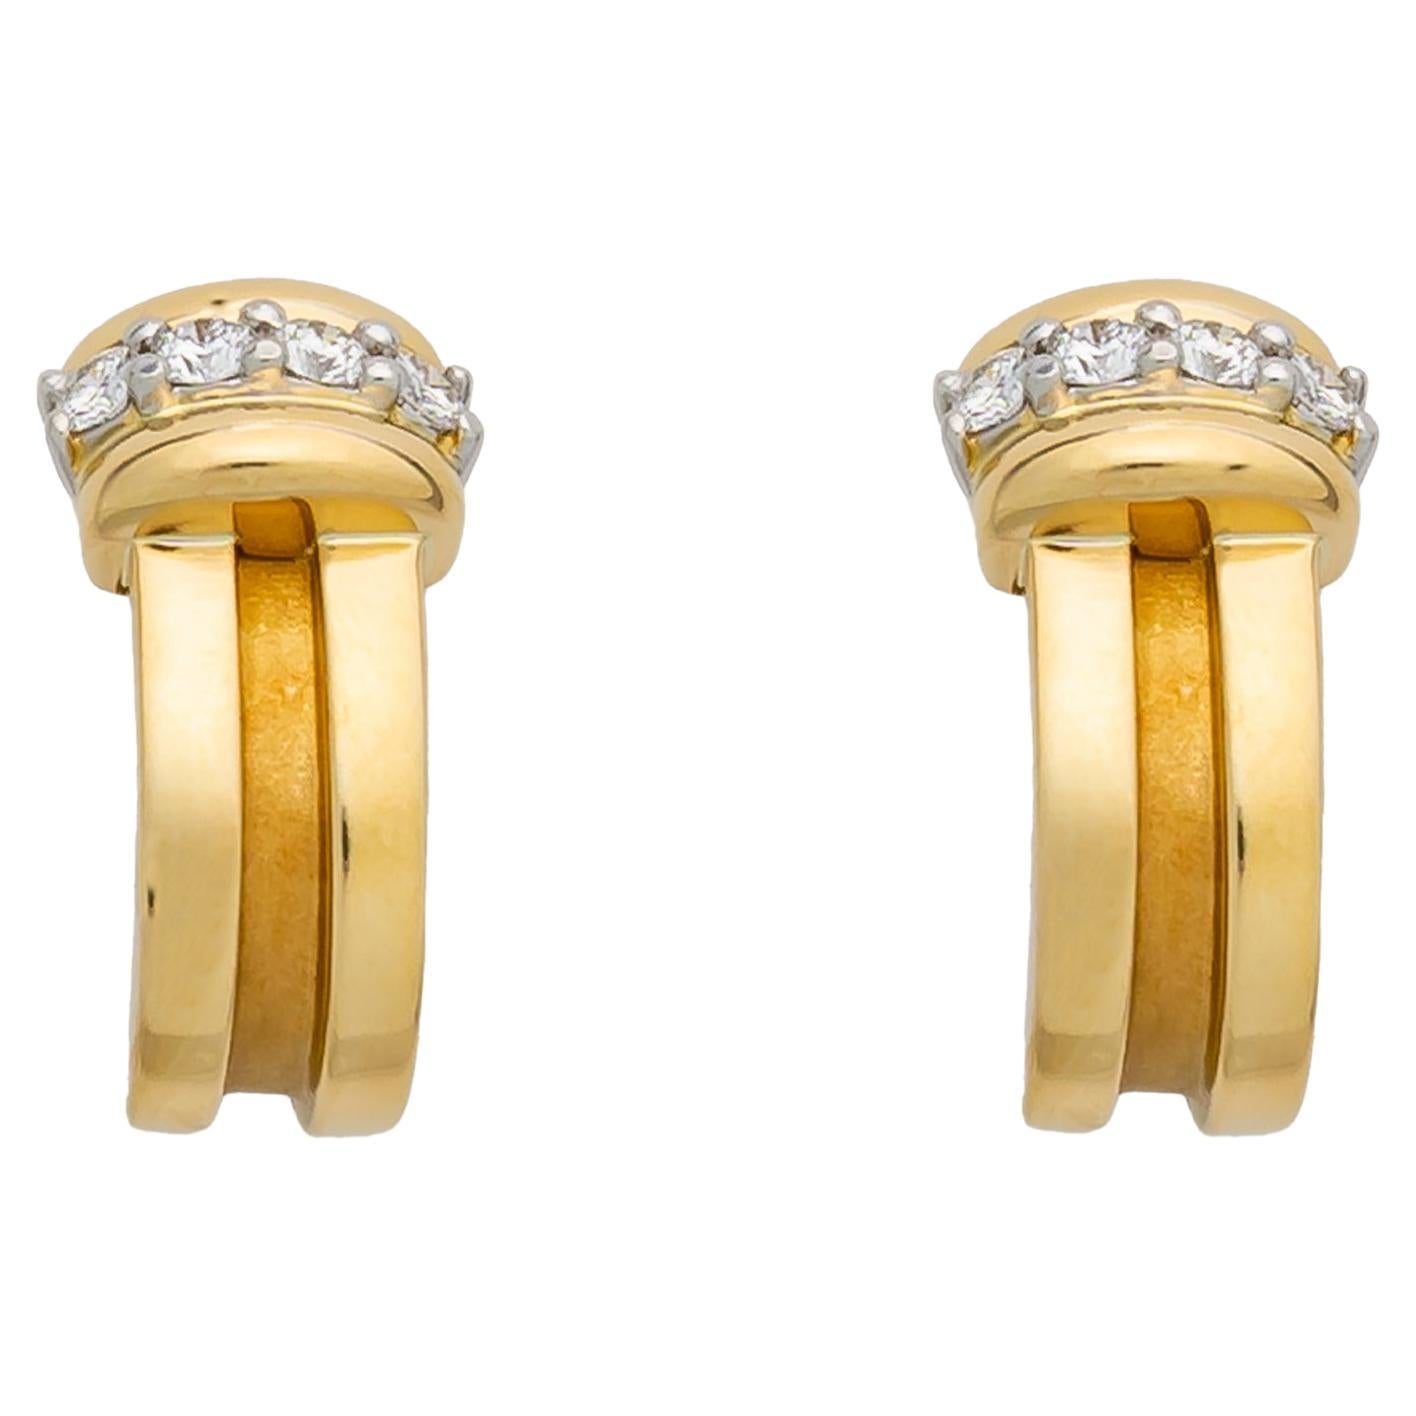 Tiffany & Co. Atlas Collection Gold and Diamond Earrings